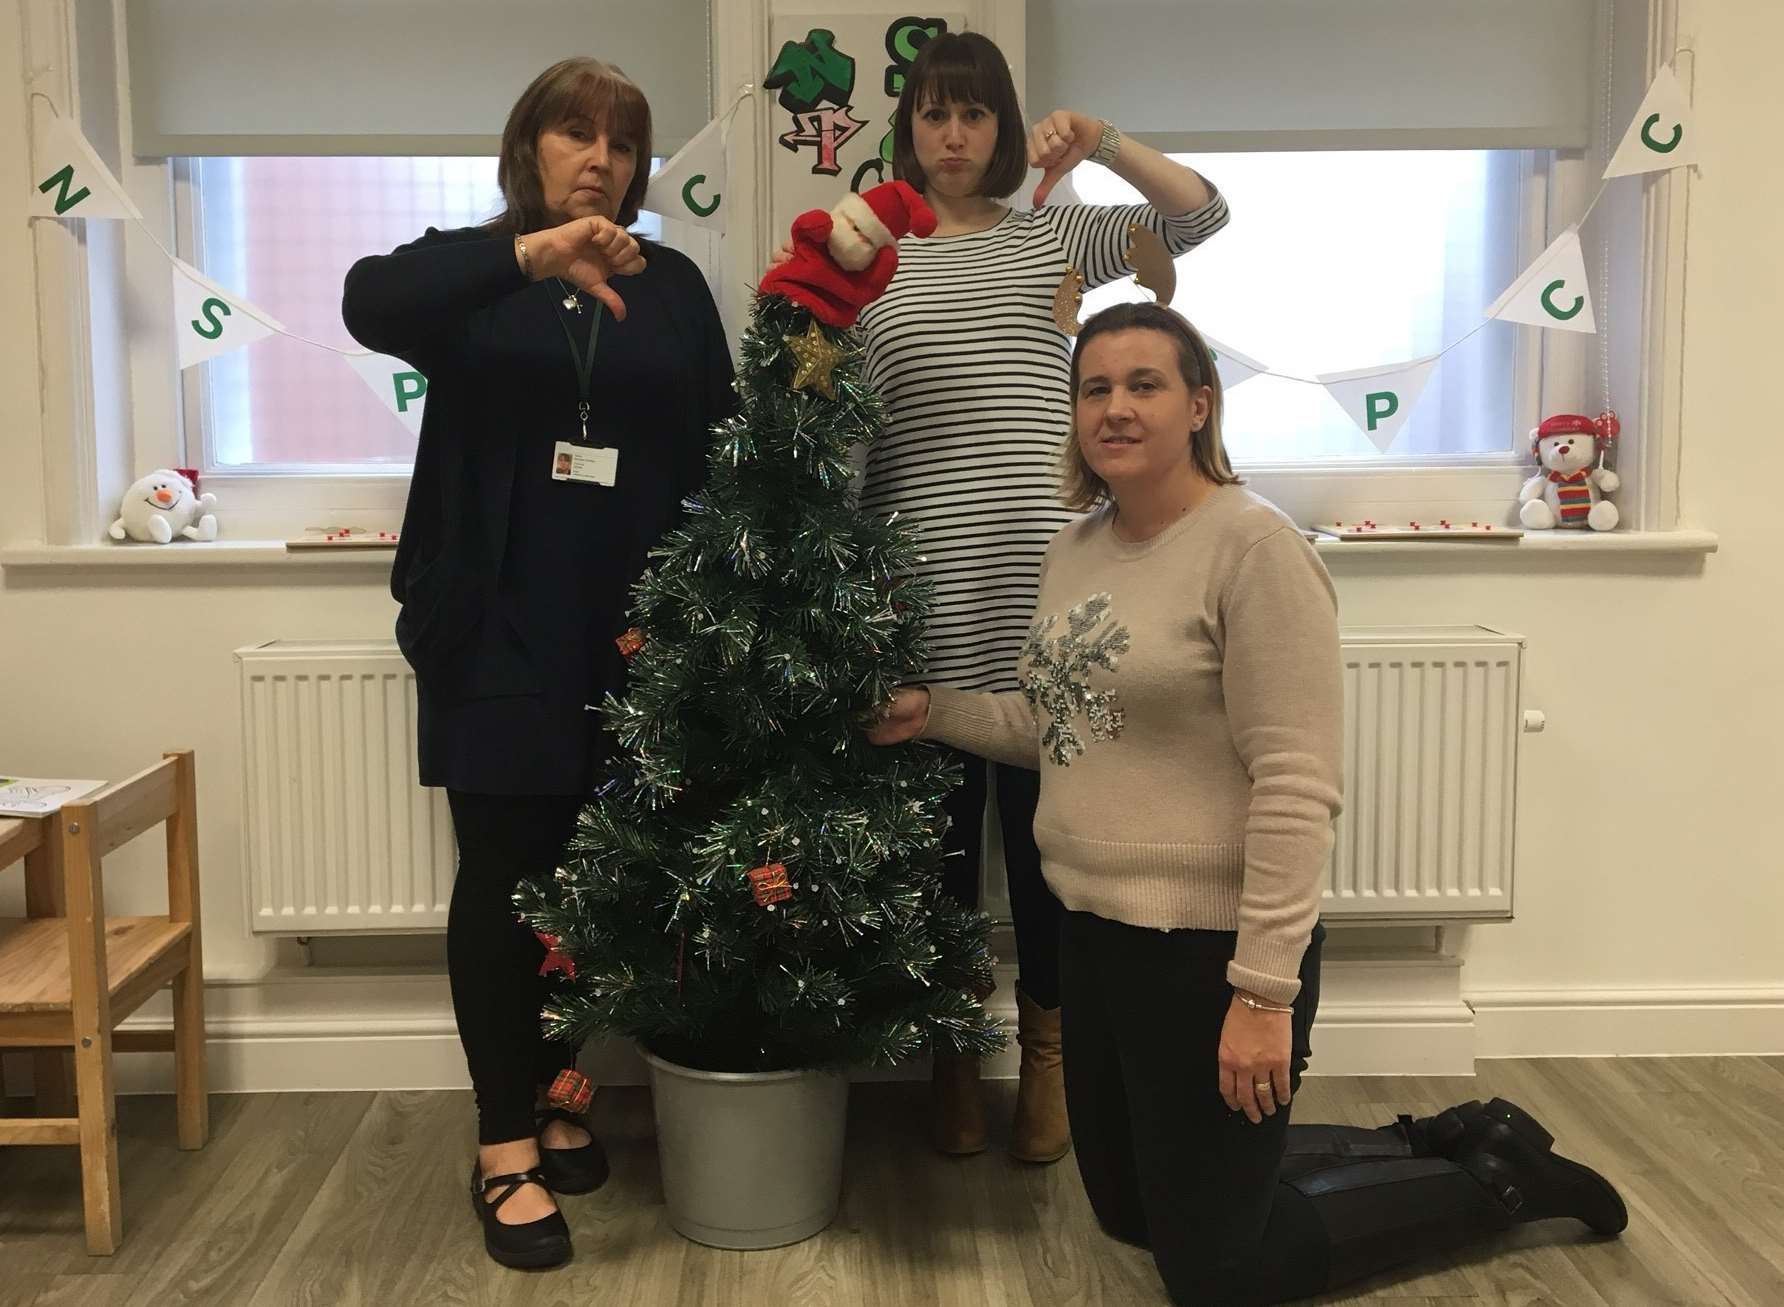 Staff at the NSPCC in Gillingham with their sorry-looking Christmas